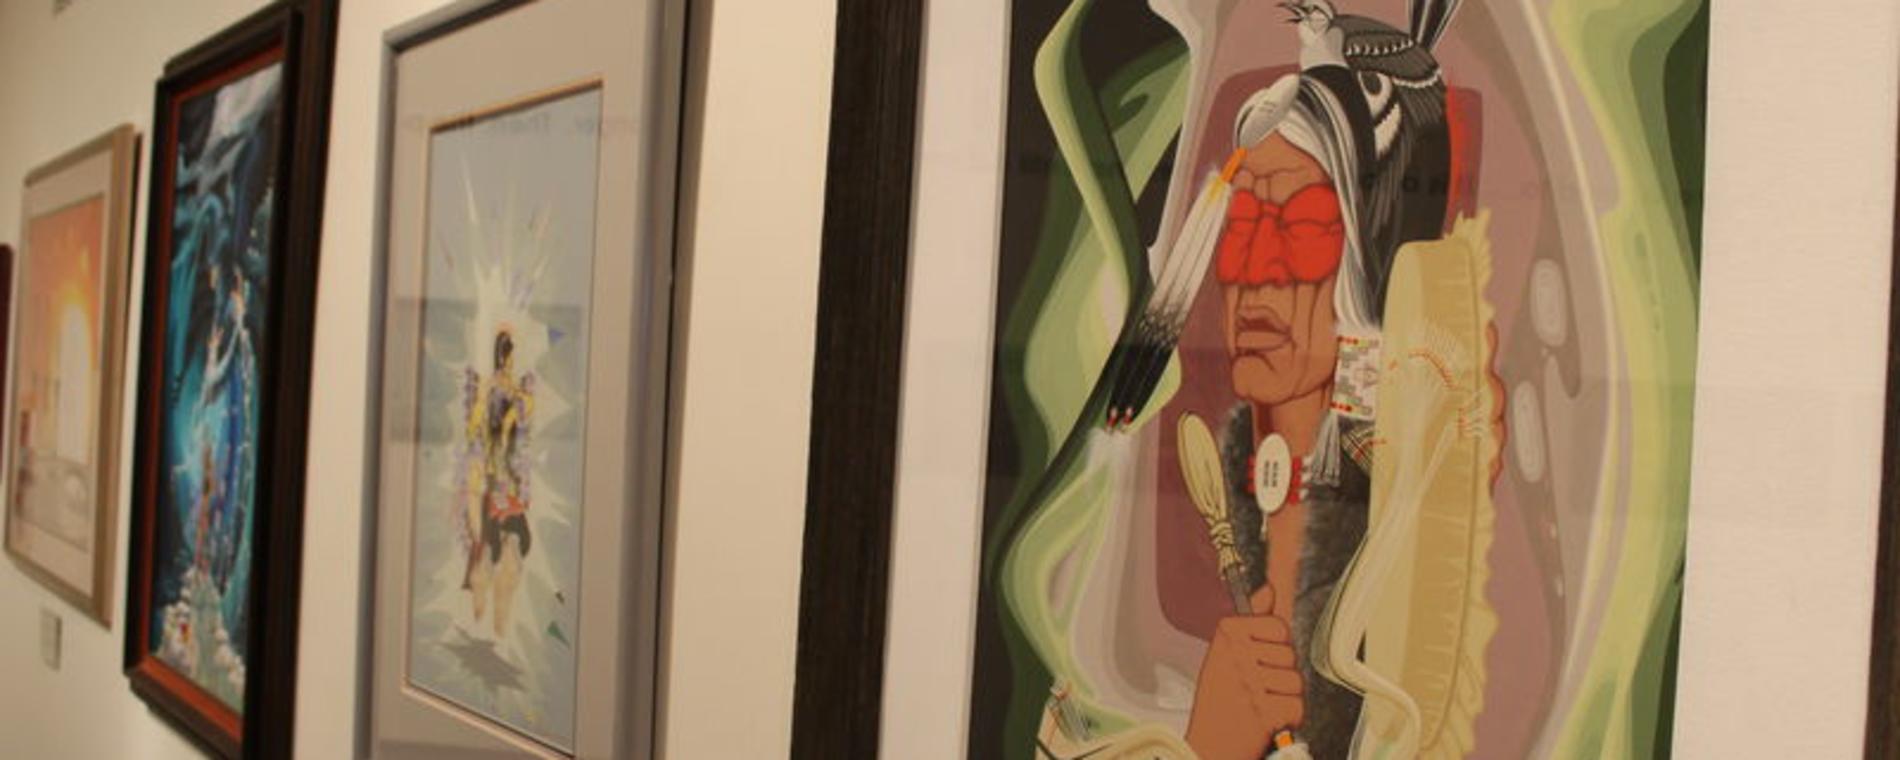 The Mid-America All-Indian Museum has an extensive collection of Blackbear Bosin's artwork.